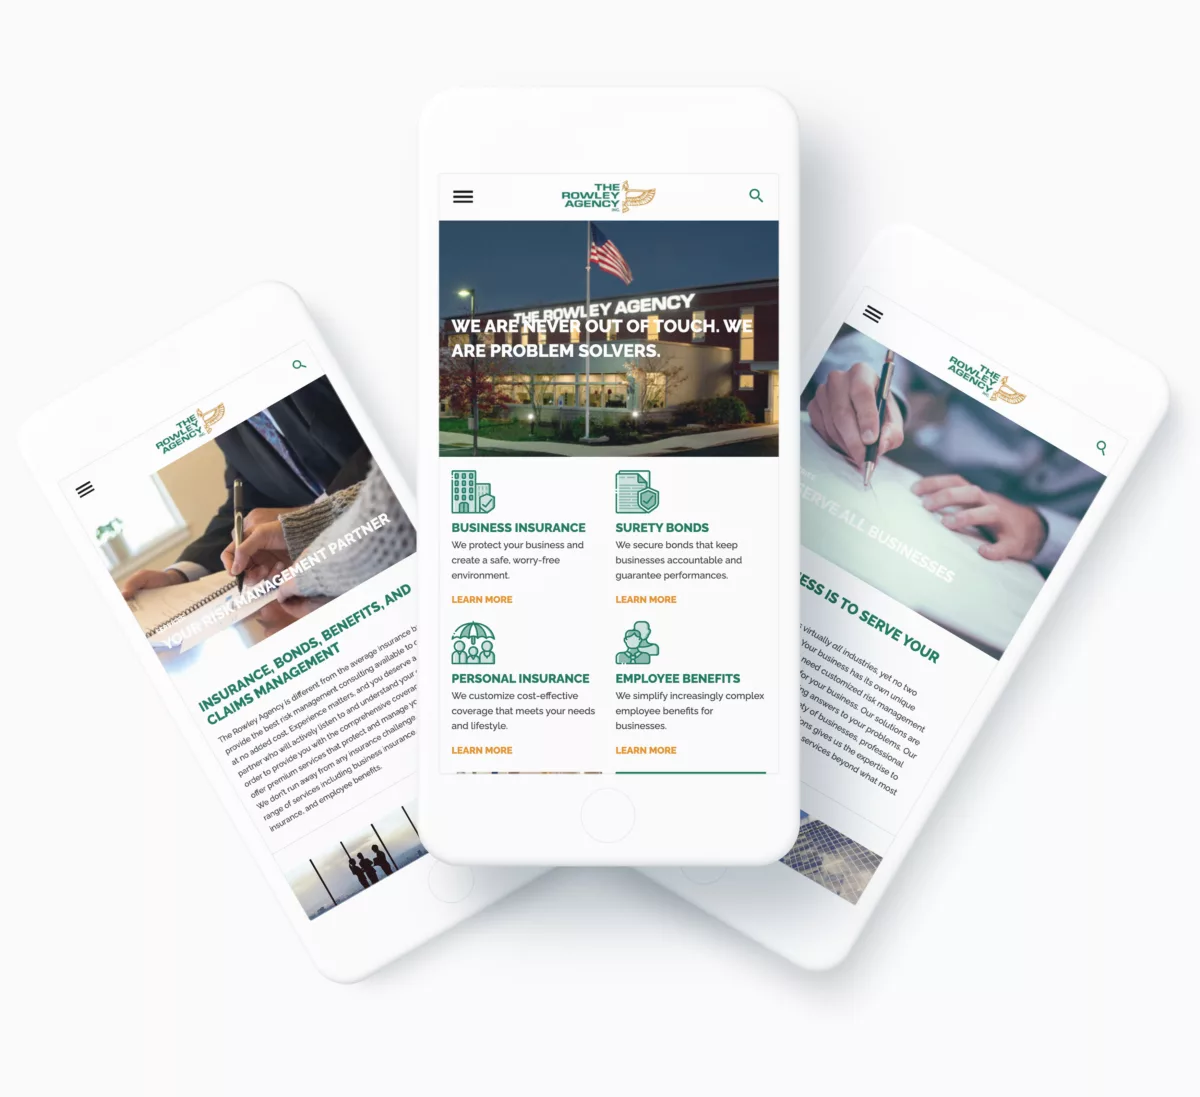 The Rowley Agency Mobile WordPress Website Design by FirstTracks Marketing